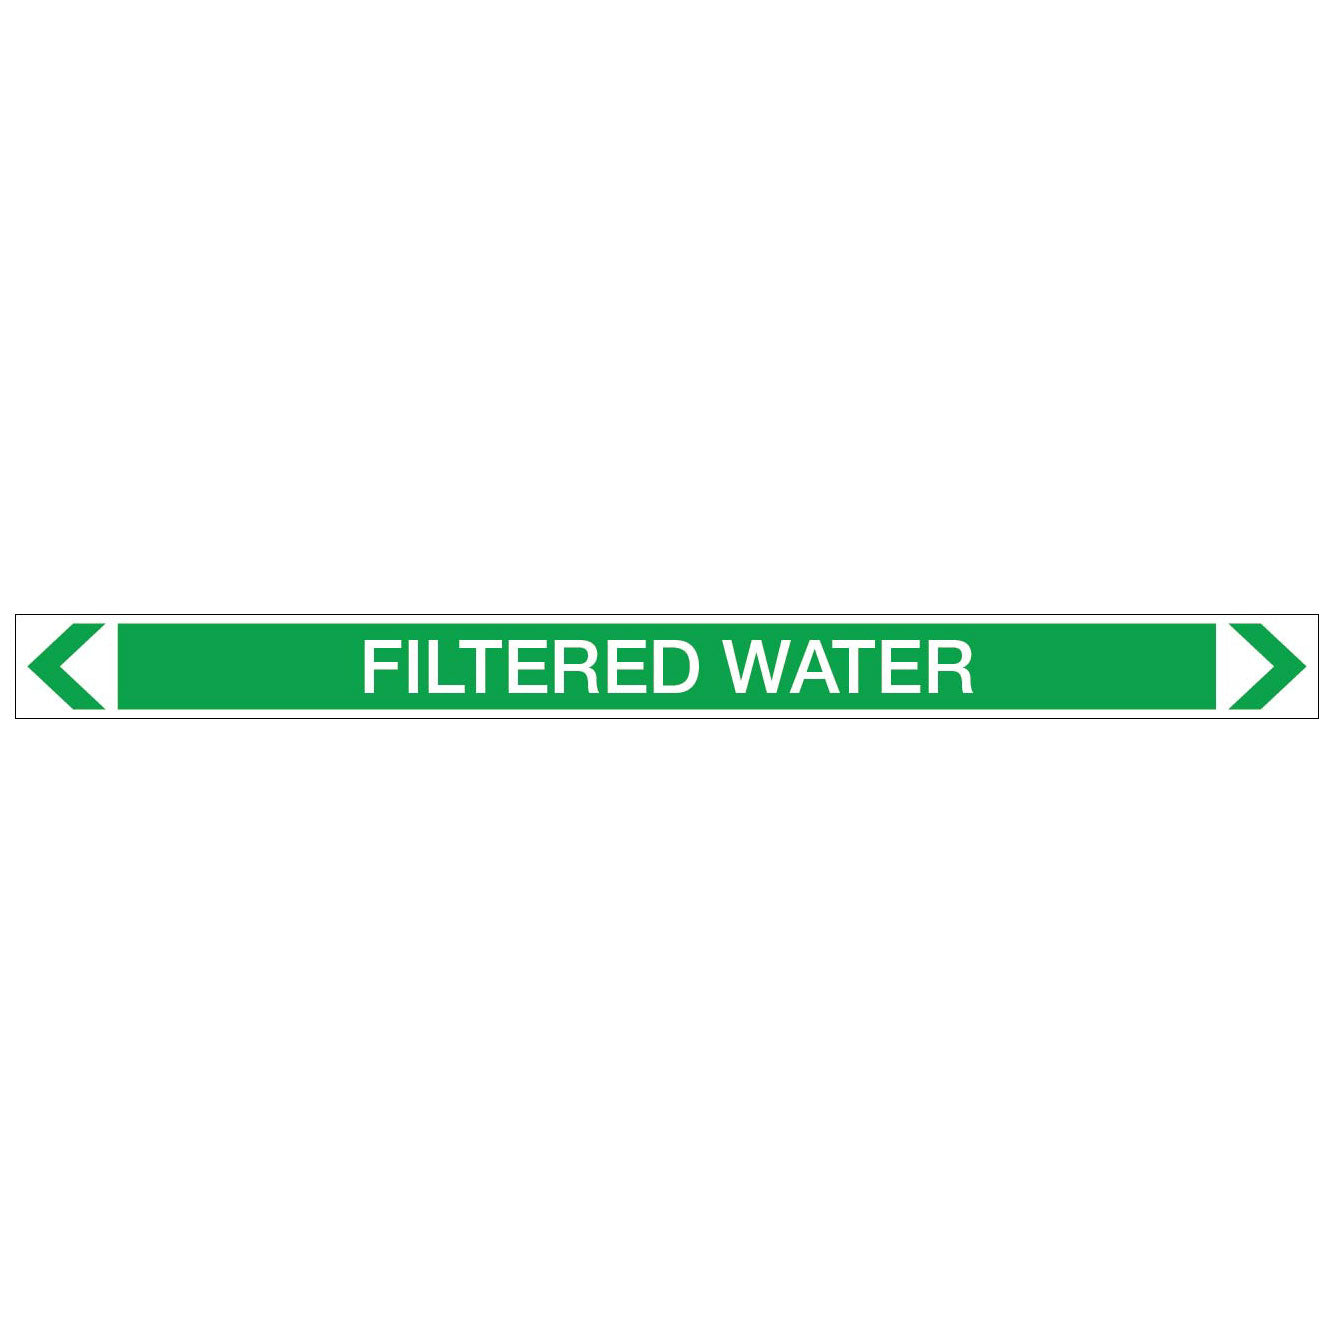 Water - Filtered Water - Pipe Marker Sticker